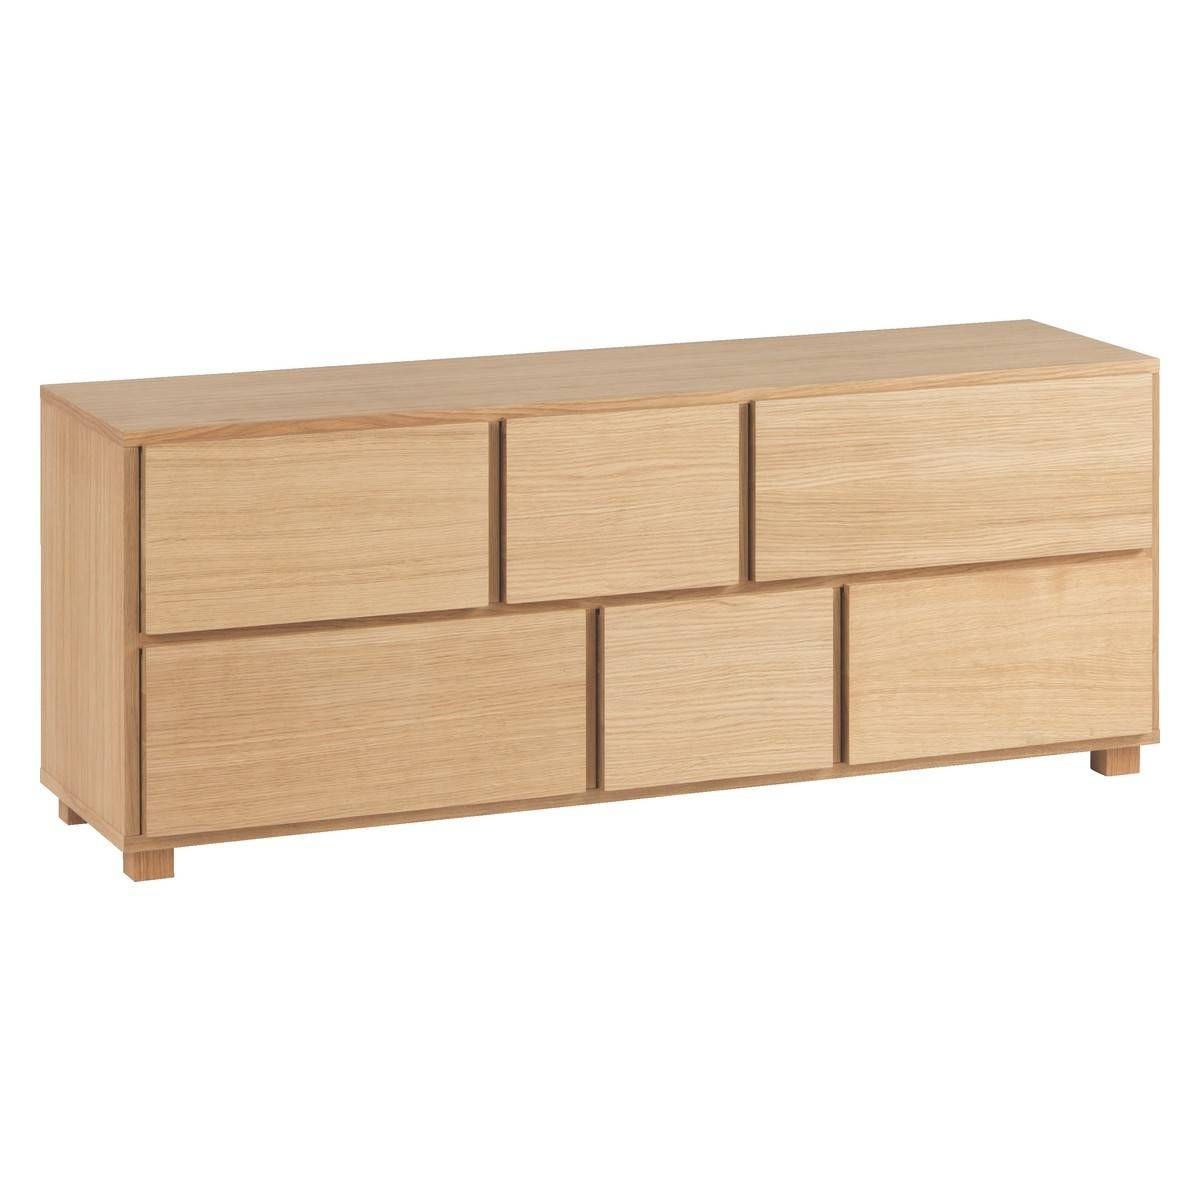 Hana Ii Oiled Oak 6 Drawer Low Wide Chest | Buy Now At Habitat Uk Throughout Most Recently Released Low Wooden Sideboards (Photo 3 of 15)